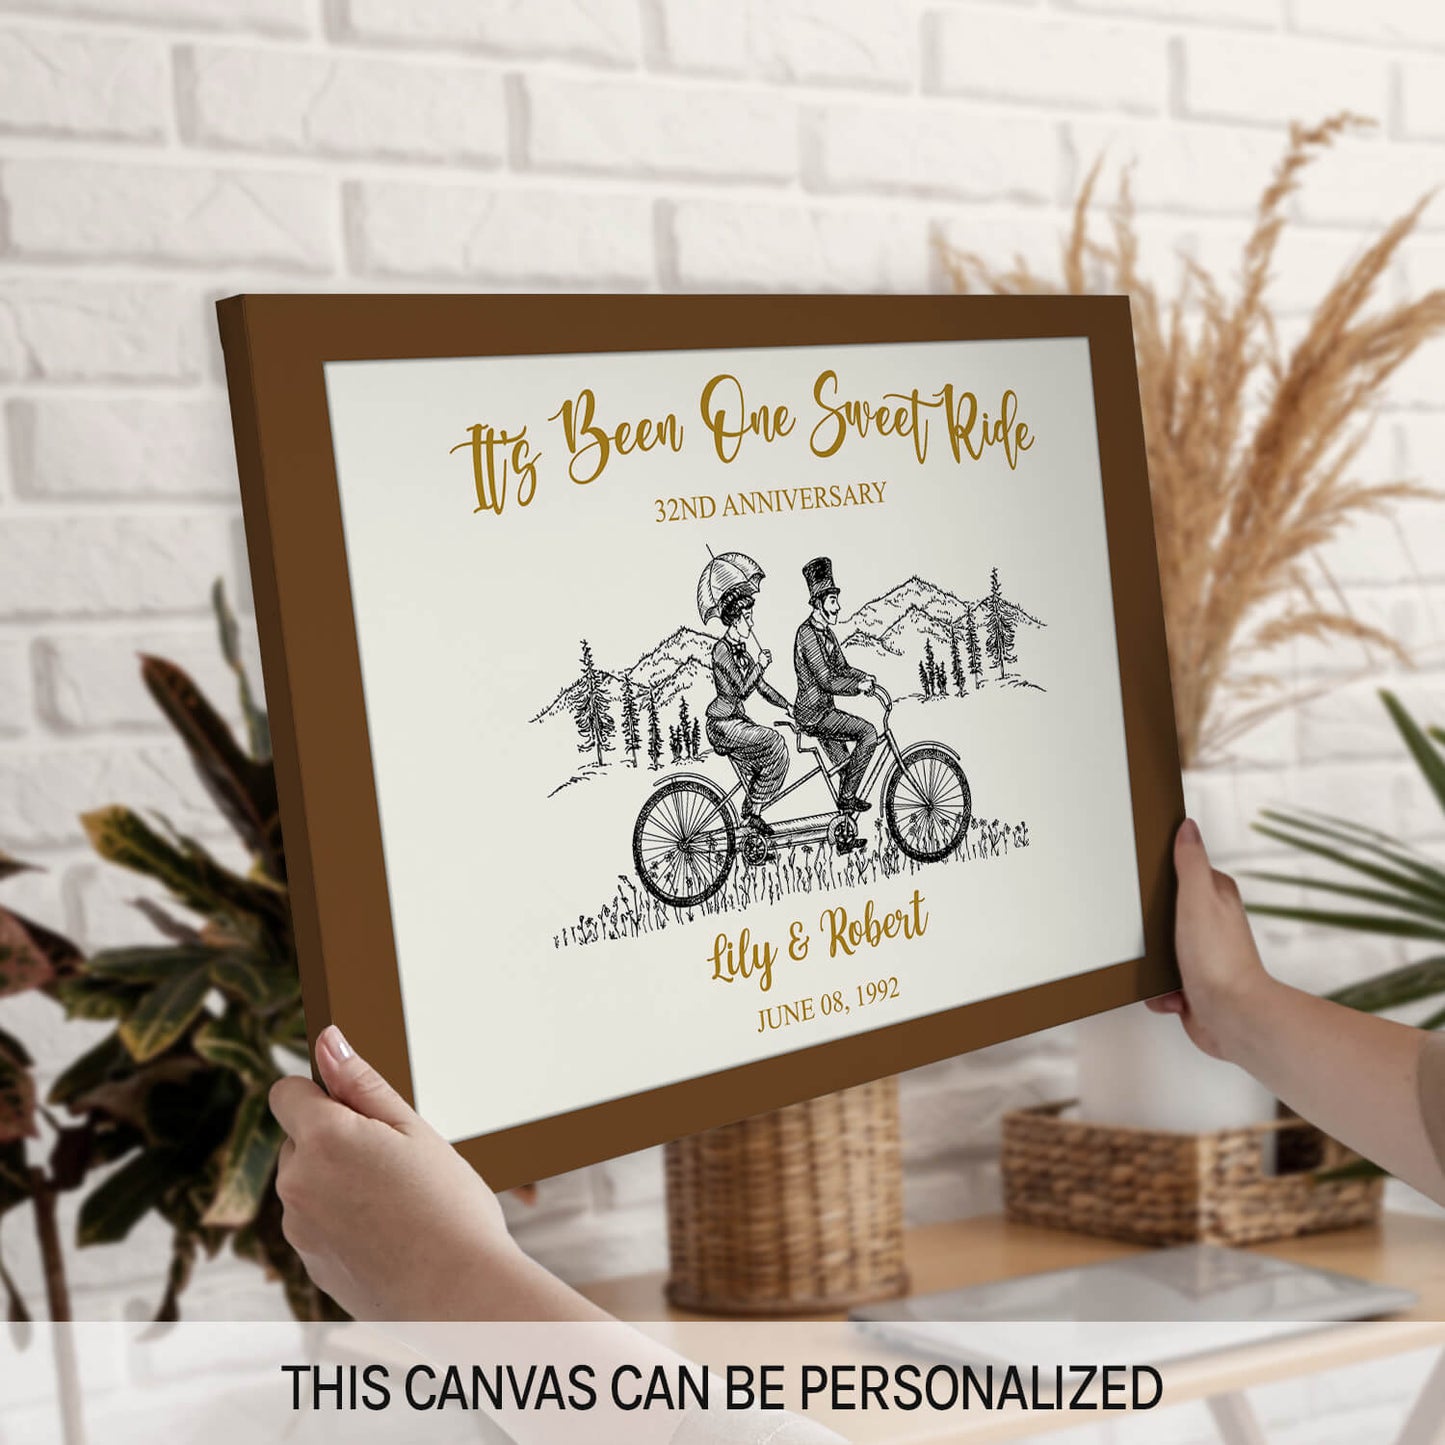 It's Been One Sweet Ride - Personalized 32 Year Anniversary gift For Parents - Custom Canvas Print - MyMindfulGifts